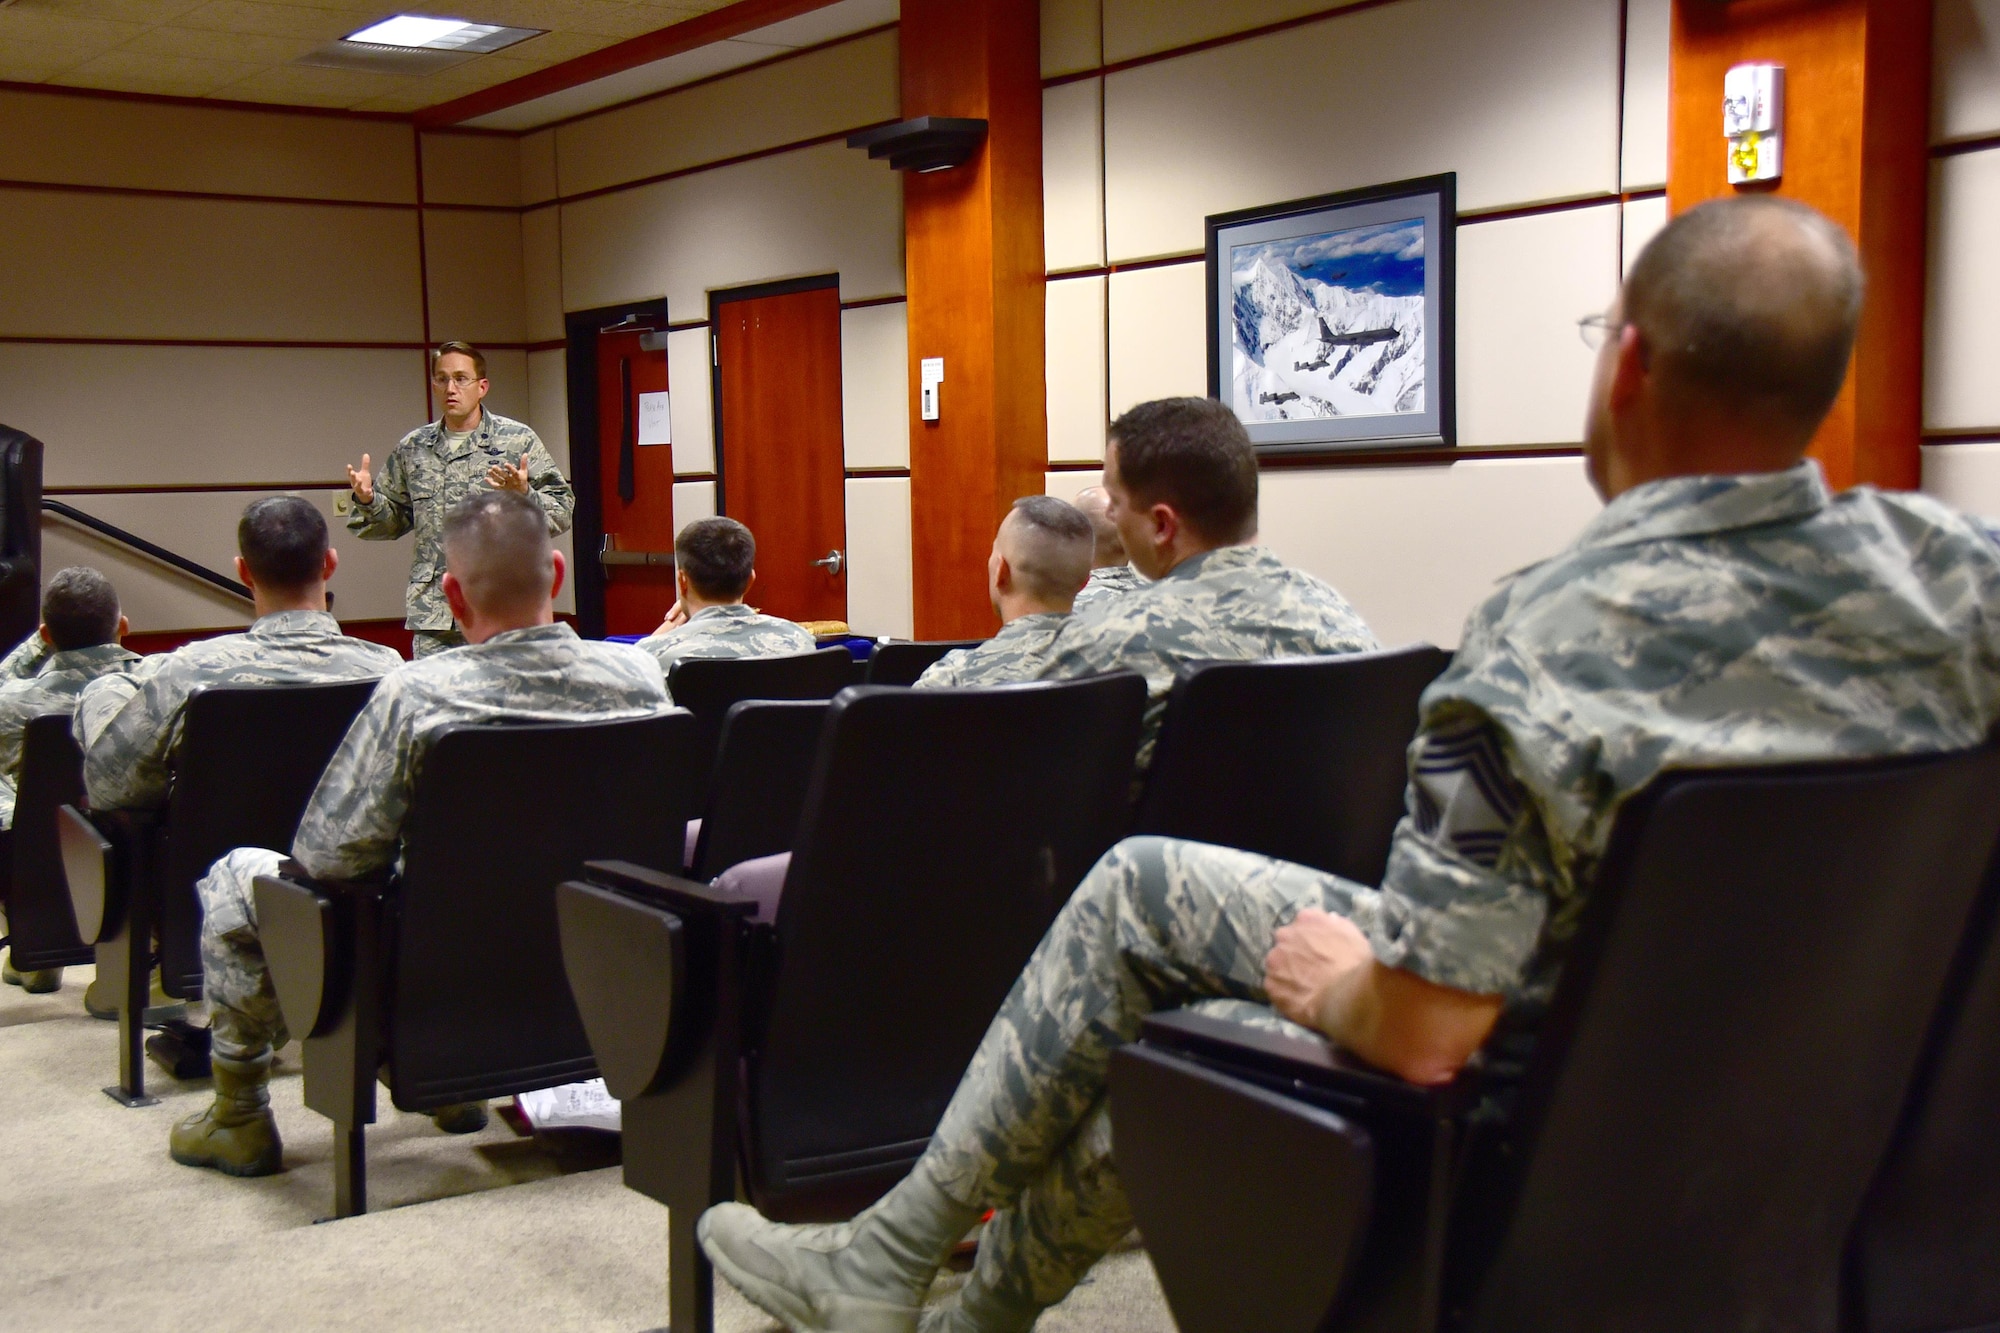 Lt. Col. Josh Zaker, 64th Air Refueling Squadron commander speaks to 22nd Air Refueling Wing leadership Oct. 20, 2016, at McConnell Air Force Base, Kan. Zaker visited McConnell to learn about how the base is preparing to receive the KC-46A Pegasus so he could apply the practices at his home unit of Pease Air National Guard Base, N.H. (U.S. Air Force photo/Senior Airman Trevor Rhynes) 